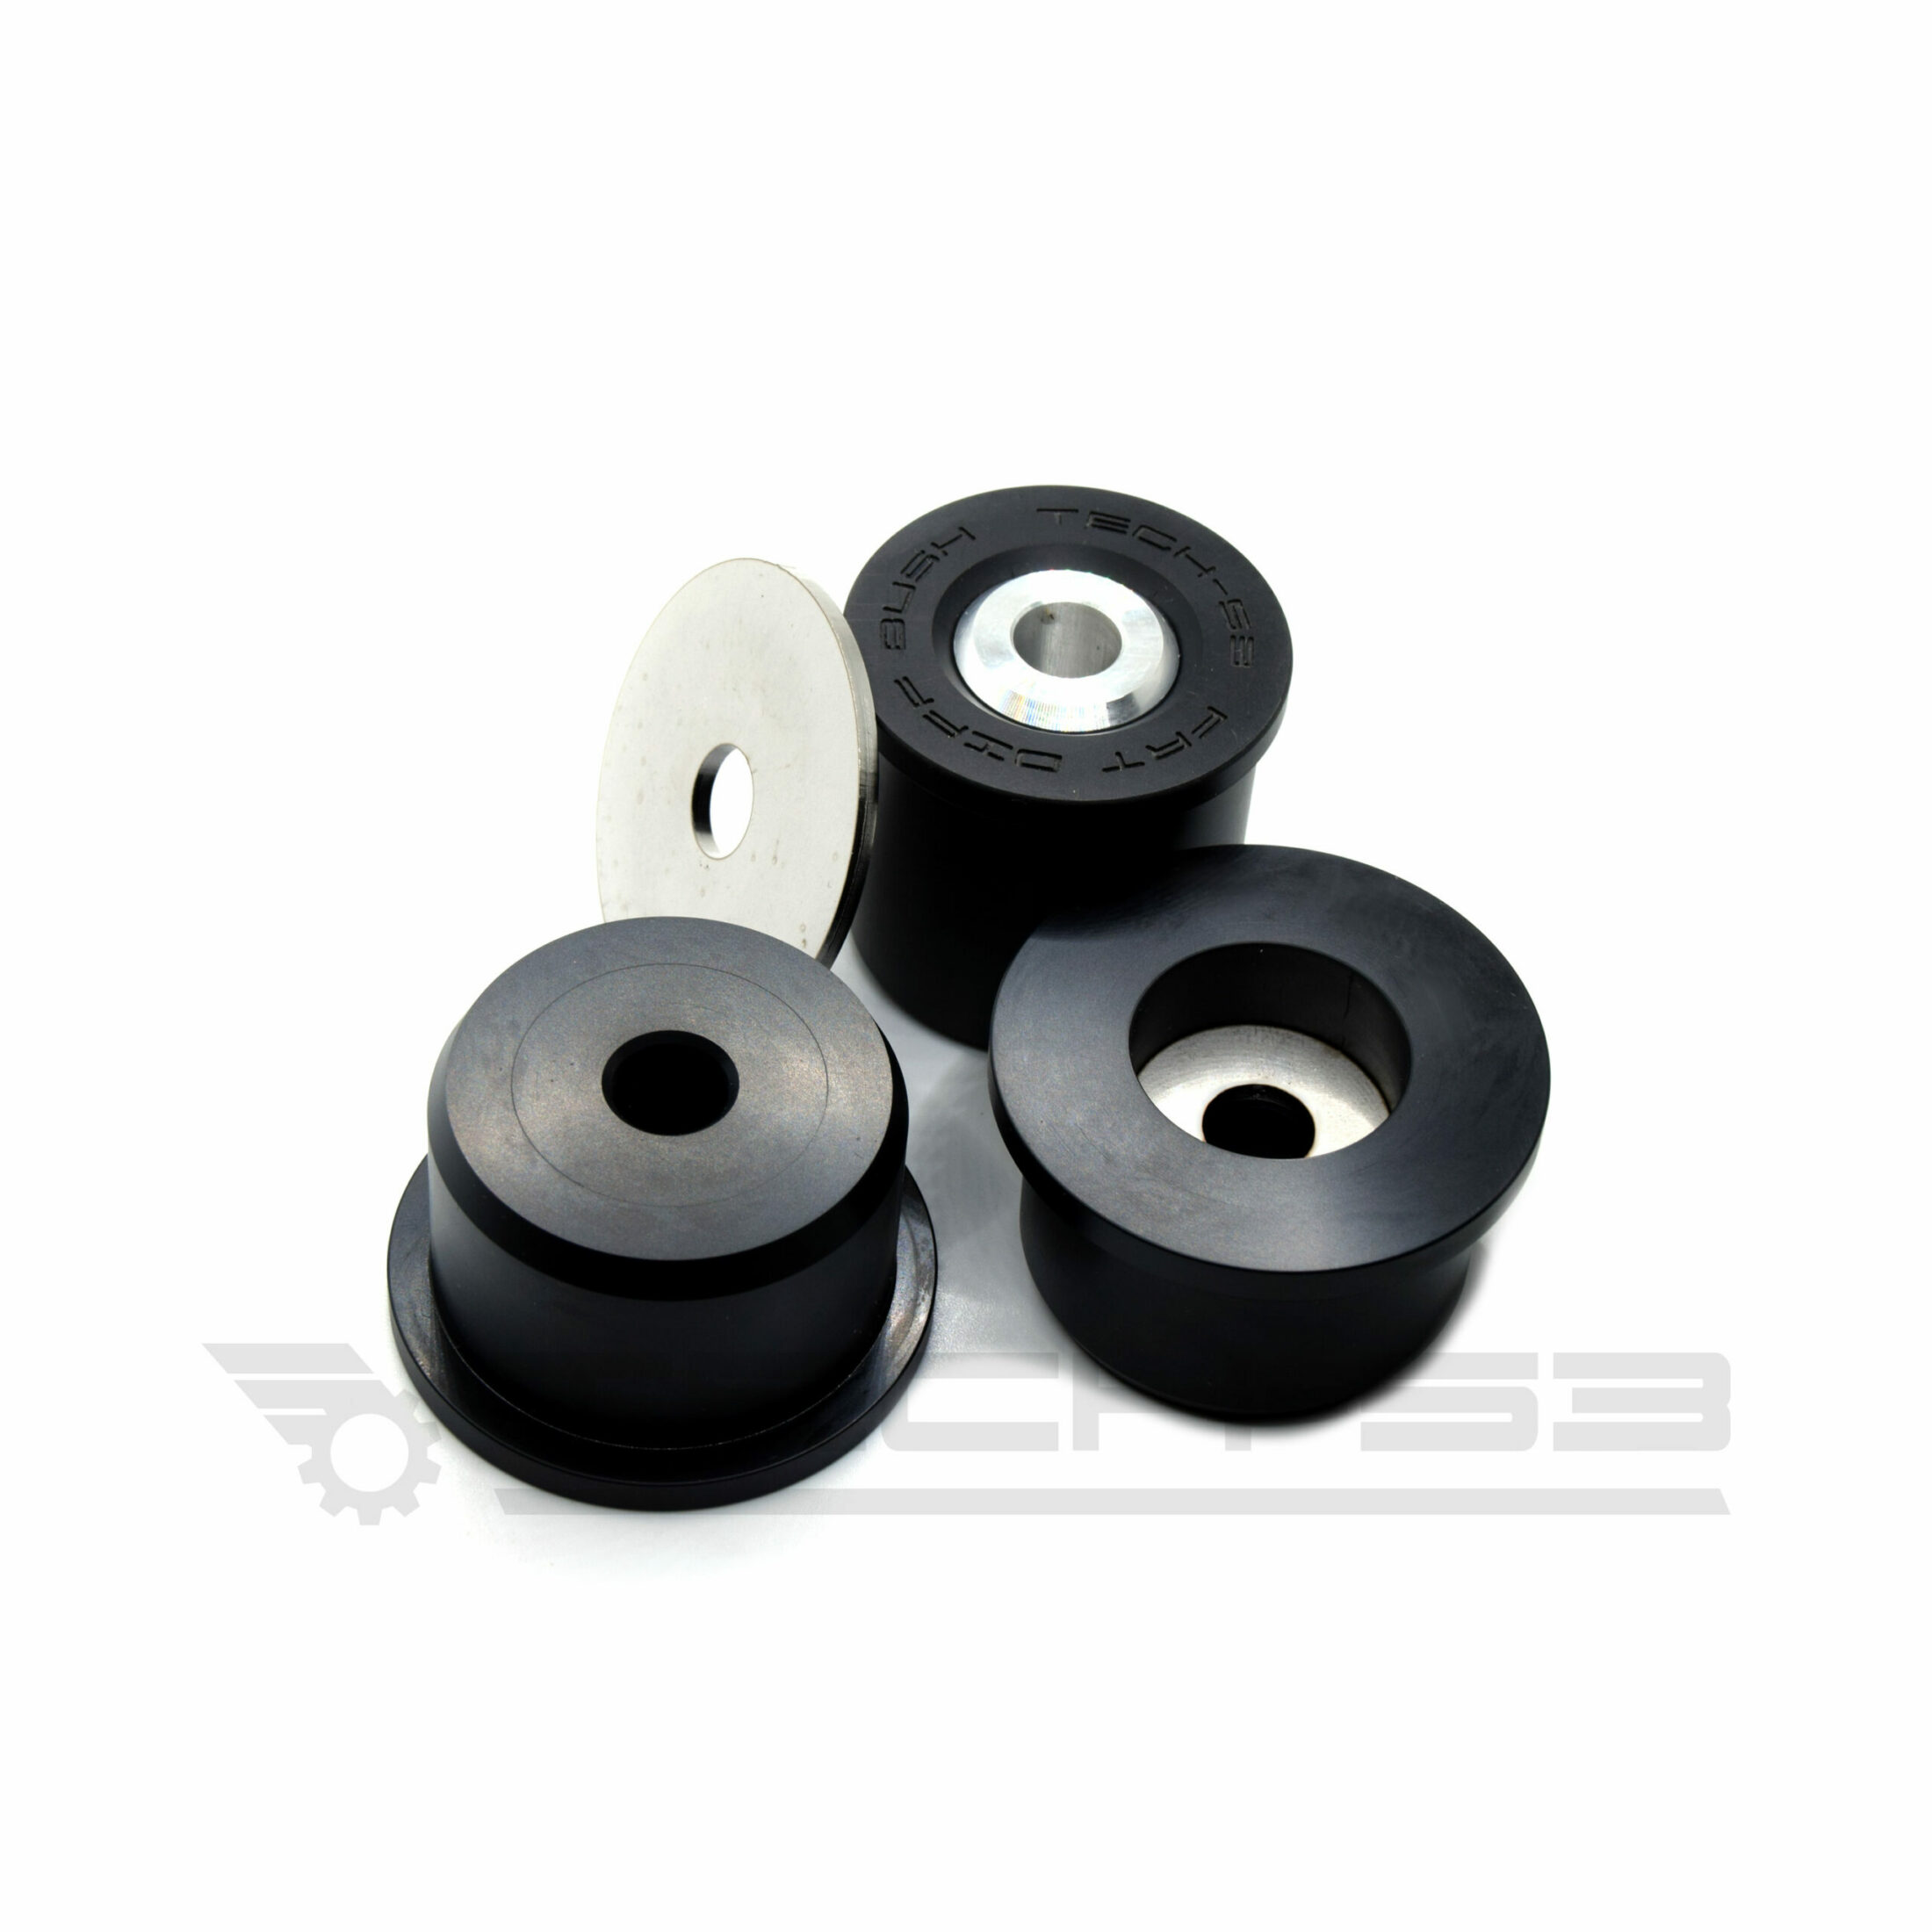 BMW E36 DIFFERENTIAL BUSHING WHEELHOP CLONK FIX SOLID UPGRADE KIT DIY UPPER COVER